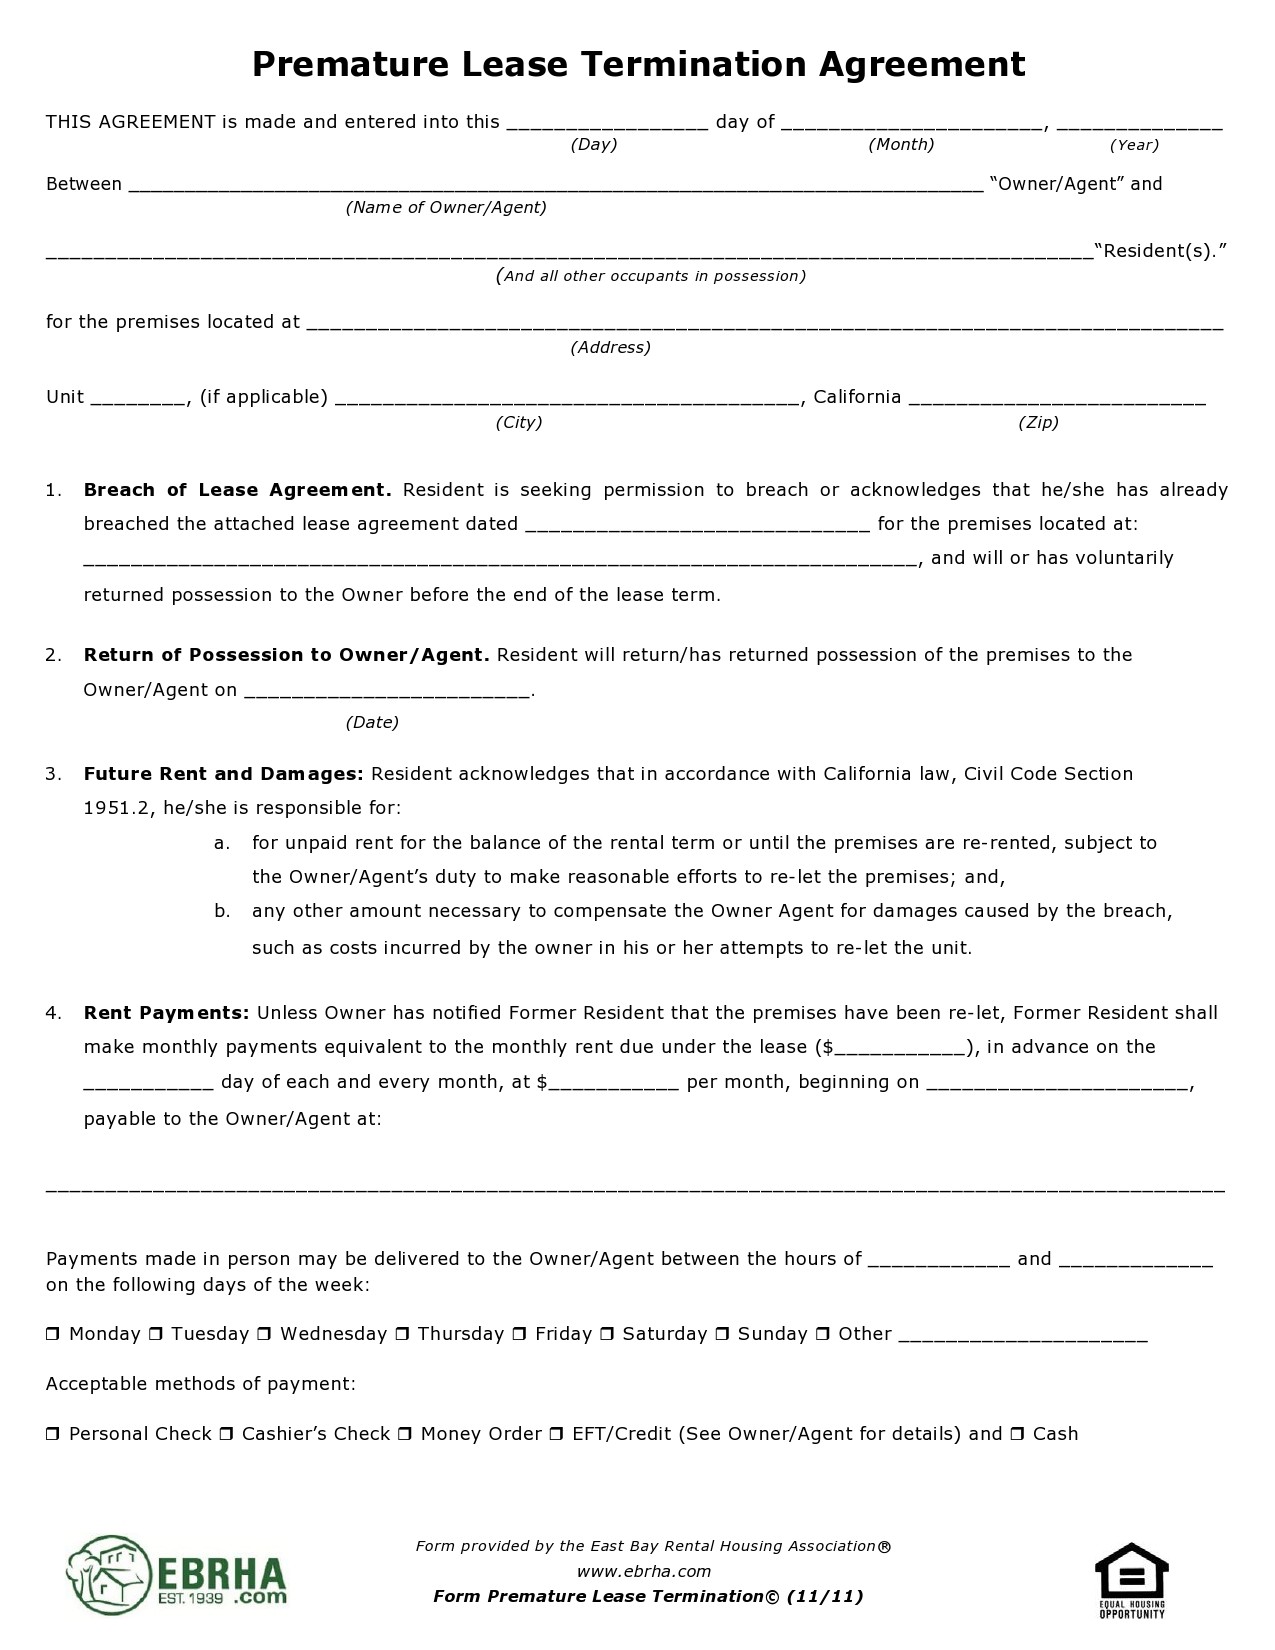 Free lease termination agreement 30